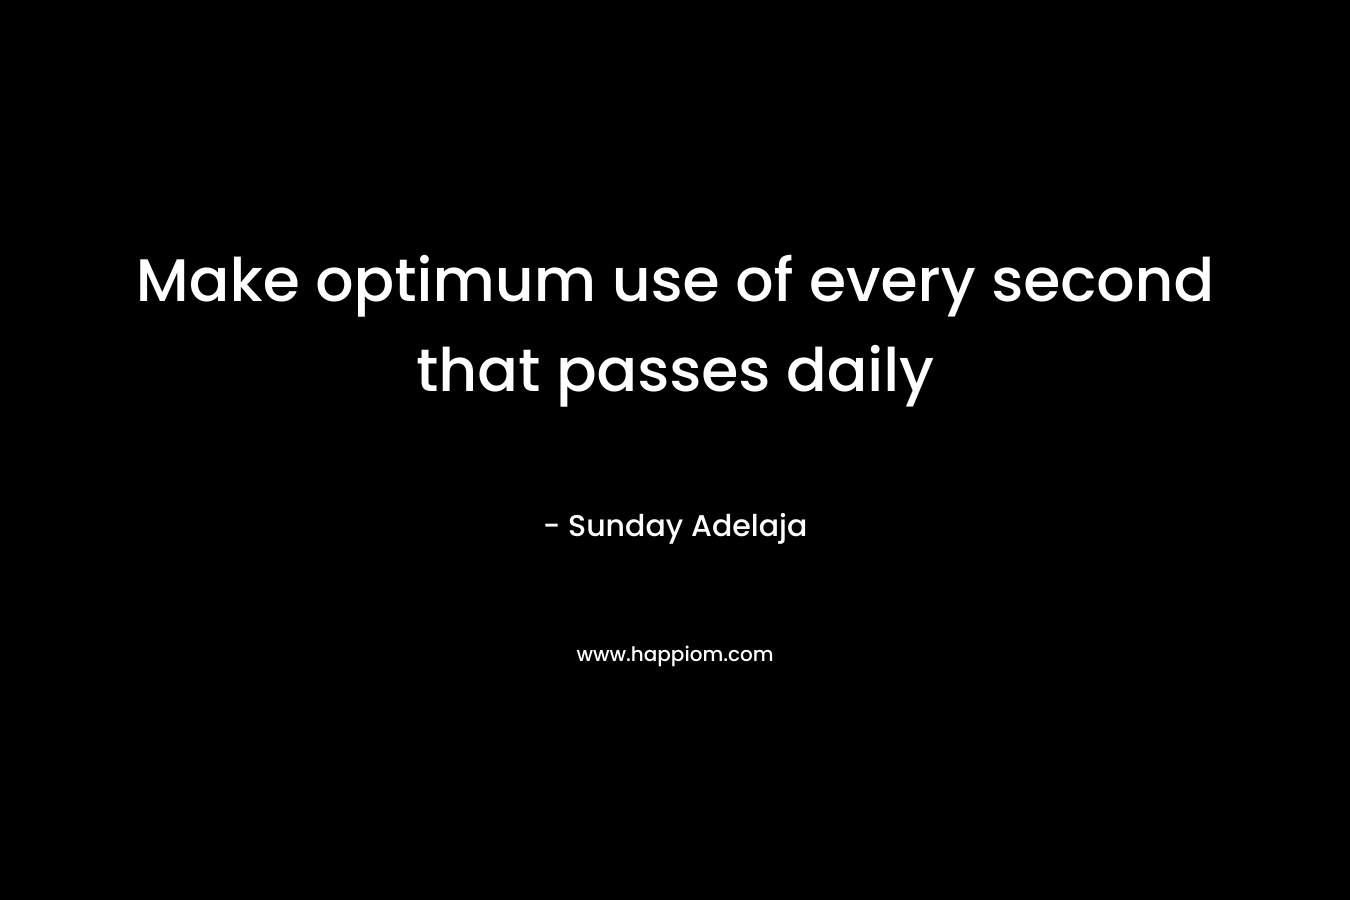 Make optimum use of every second that passes daily